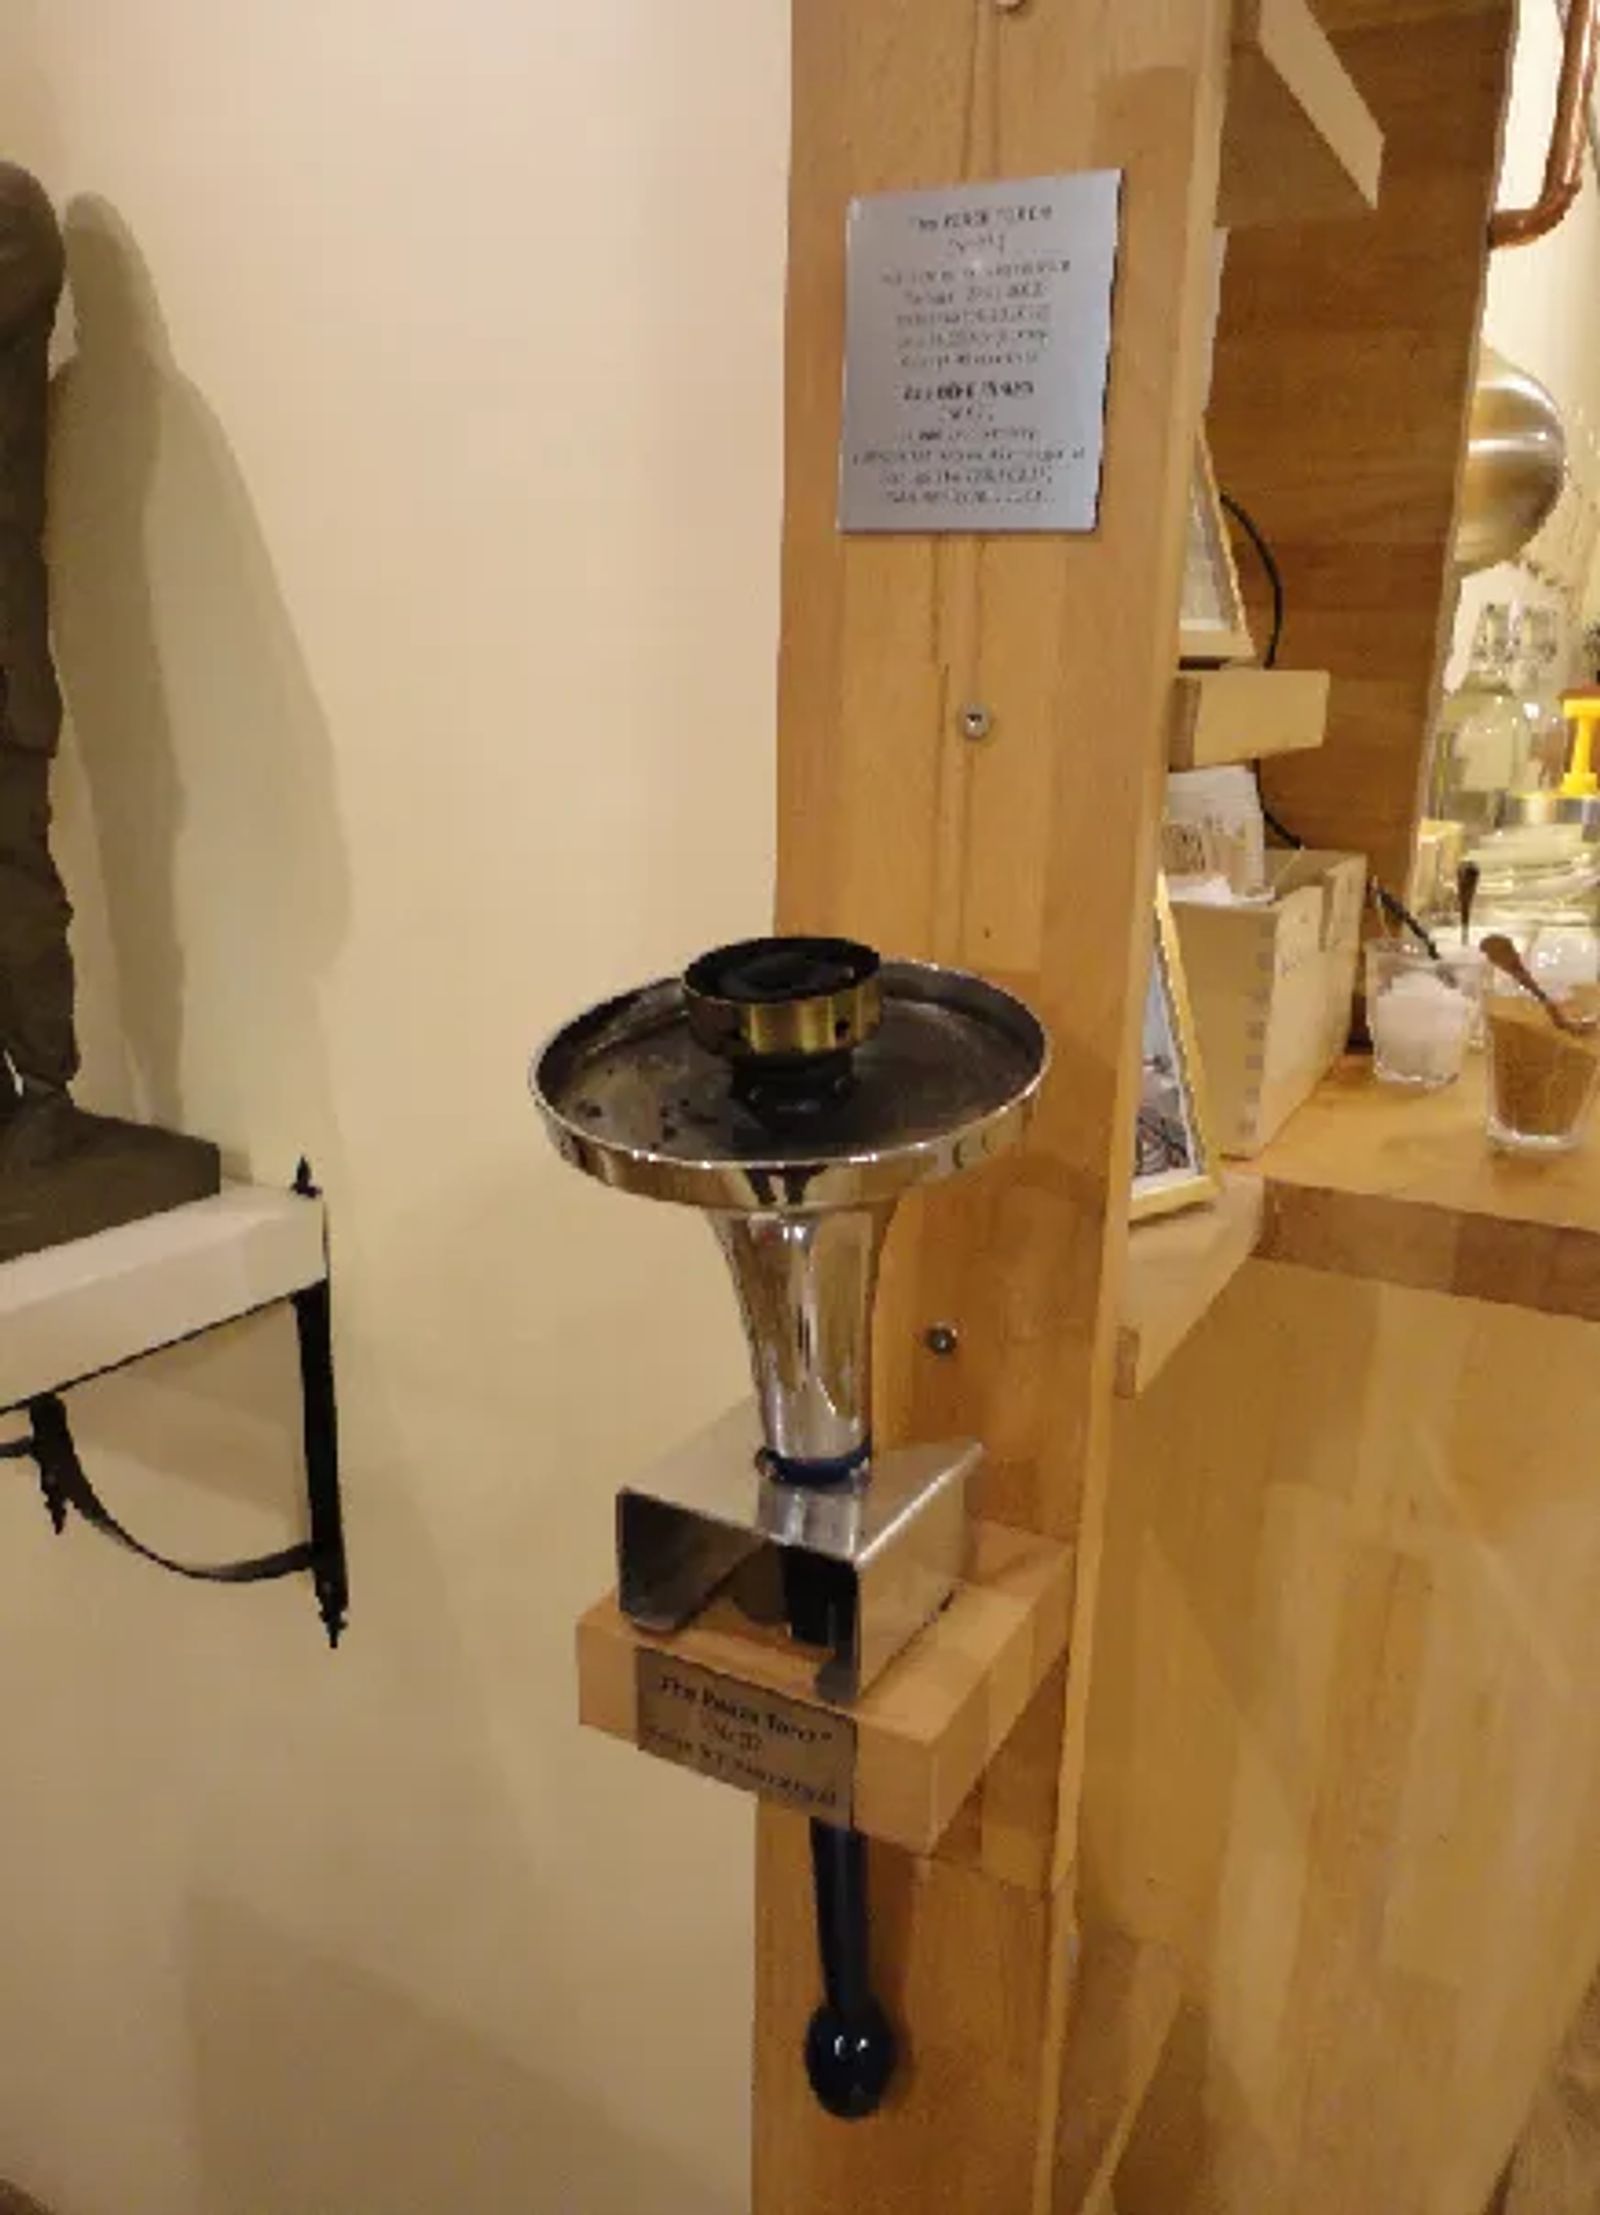 Photo of The Peace Torch displayed inside Madal Cafe, Budapest, Hungary